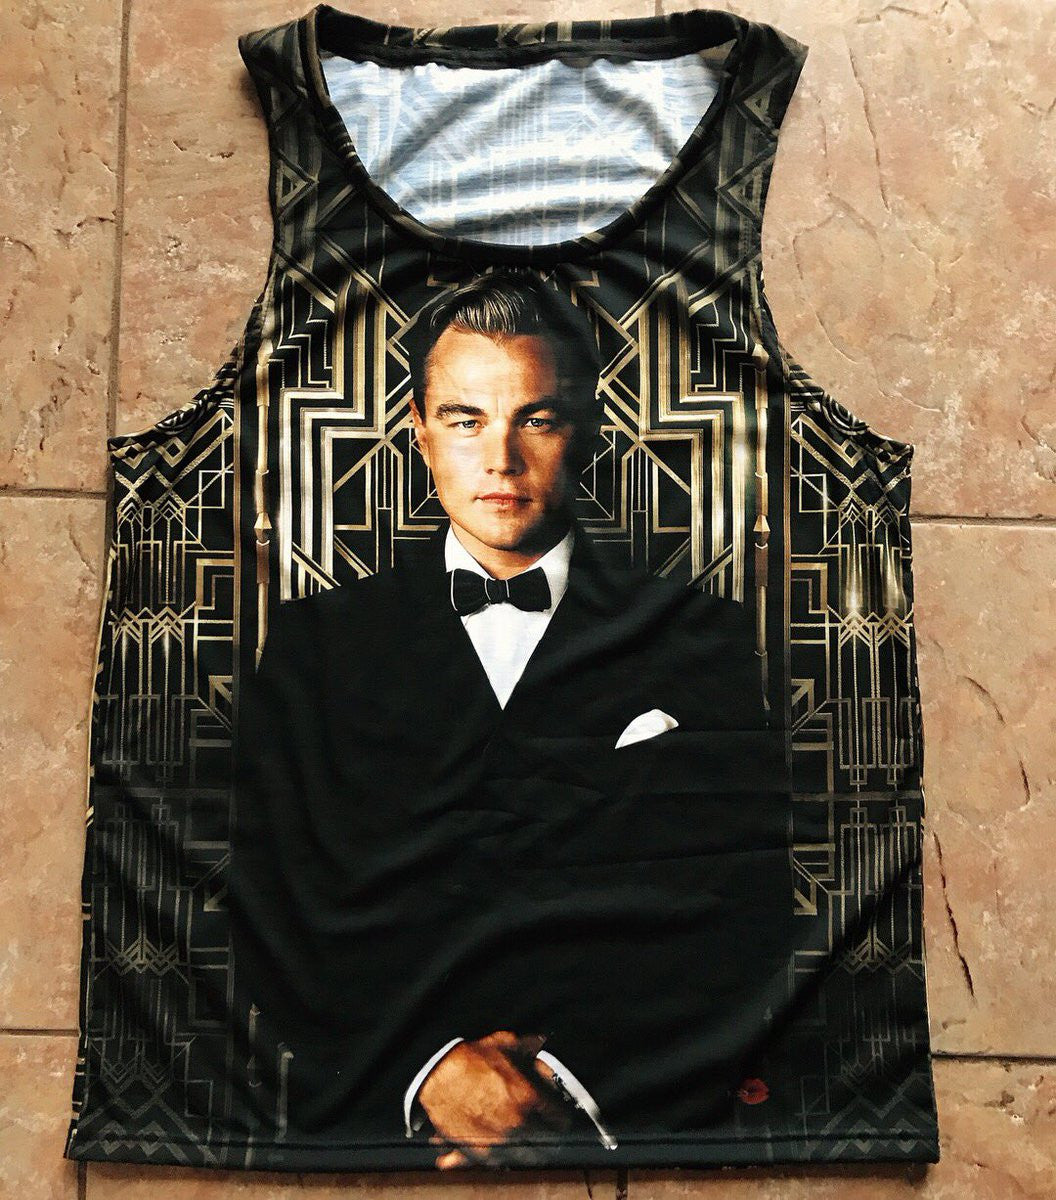 Great Gatsby 1925 KiSS Vest - Leonardo Dicaprio, Jay, Old Sport - 1920s Art Deco - movie fans - gifts for him & her